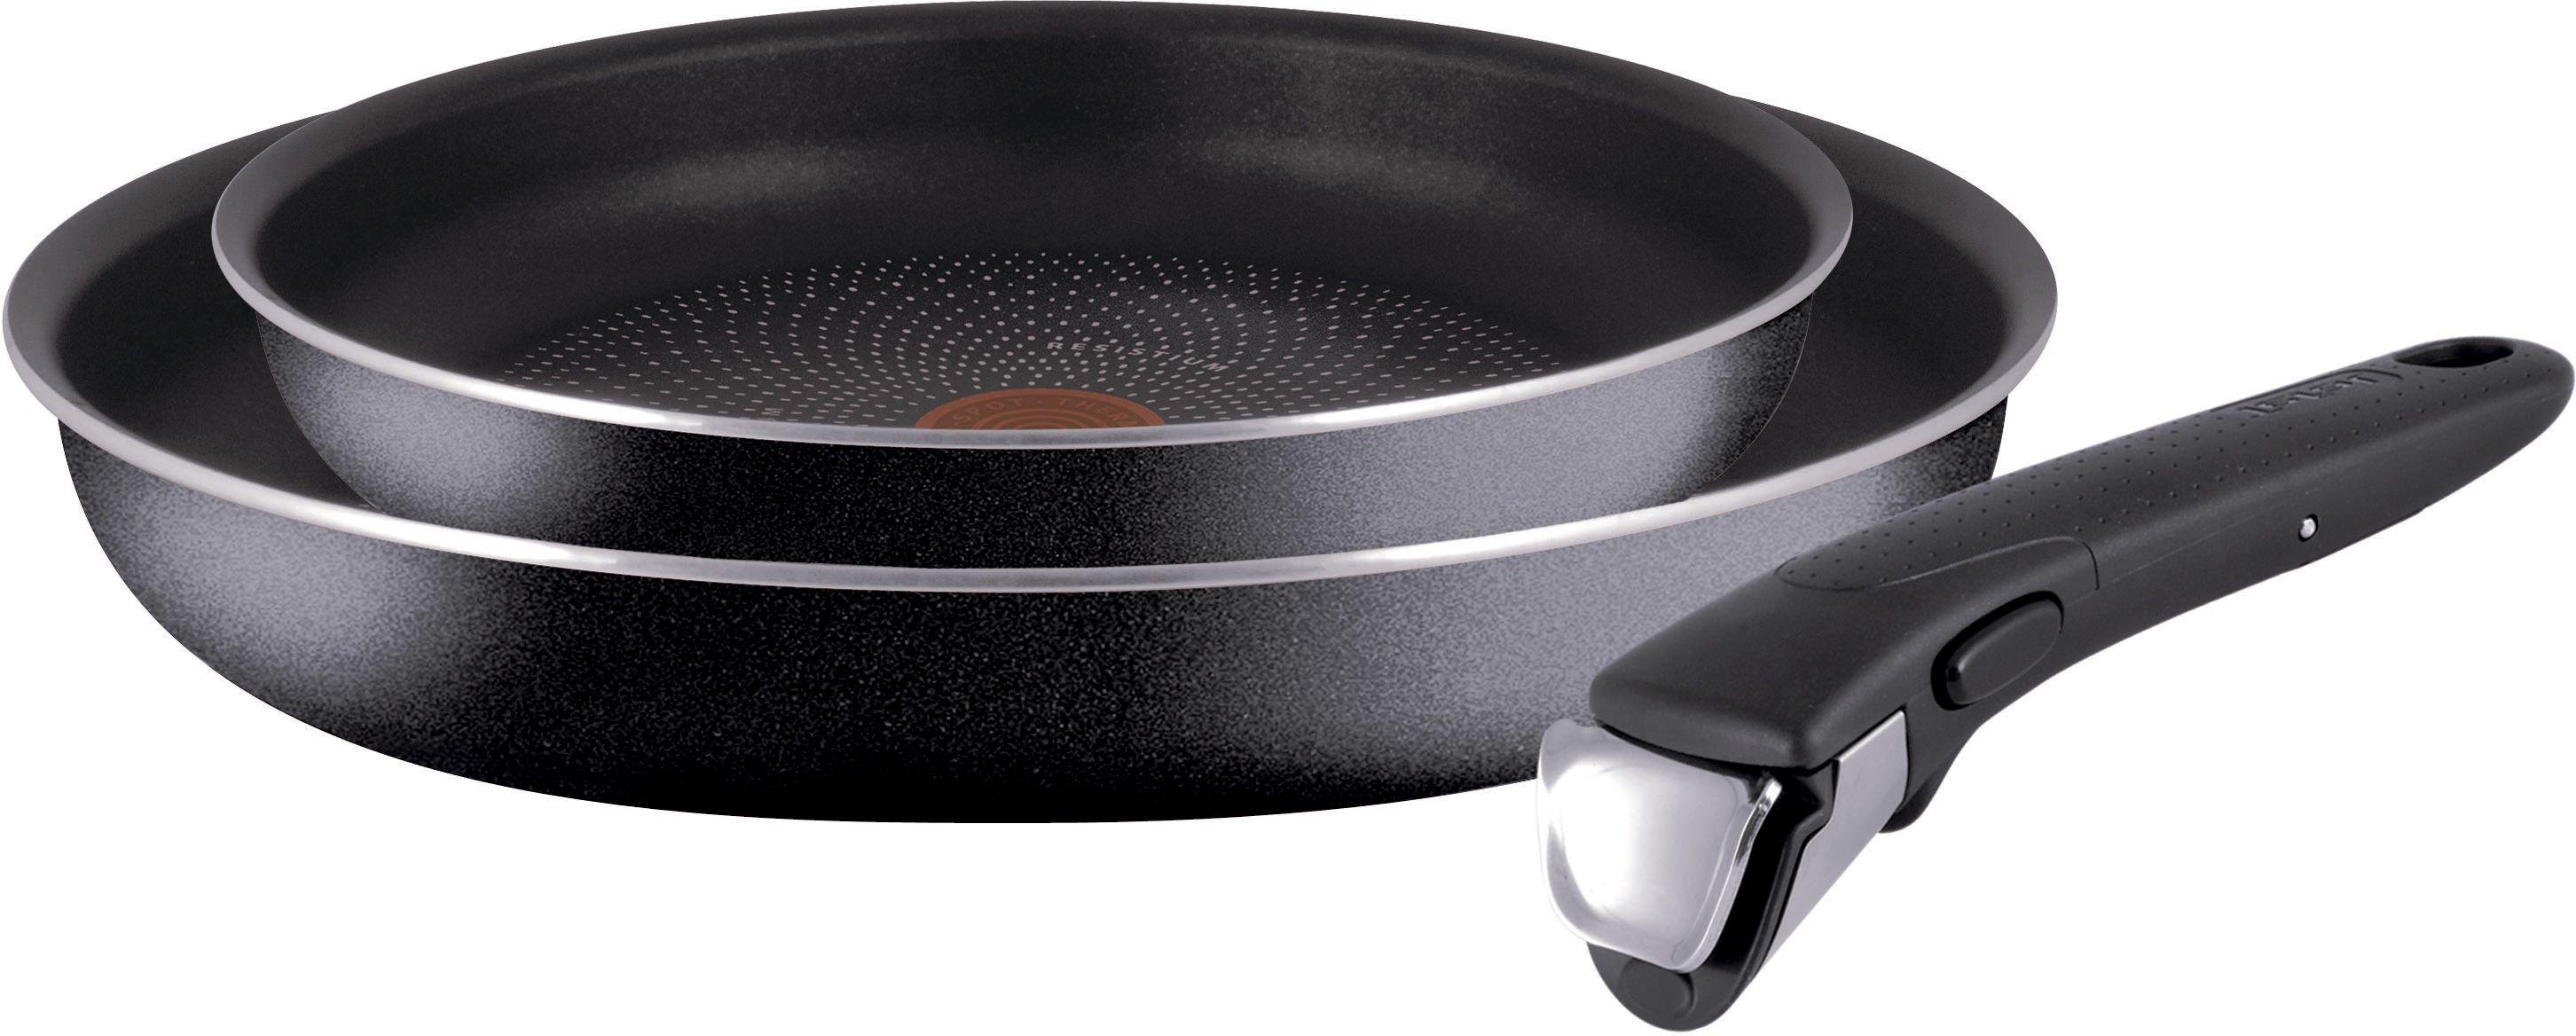 tefal large frying pan with lid